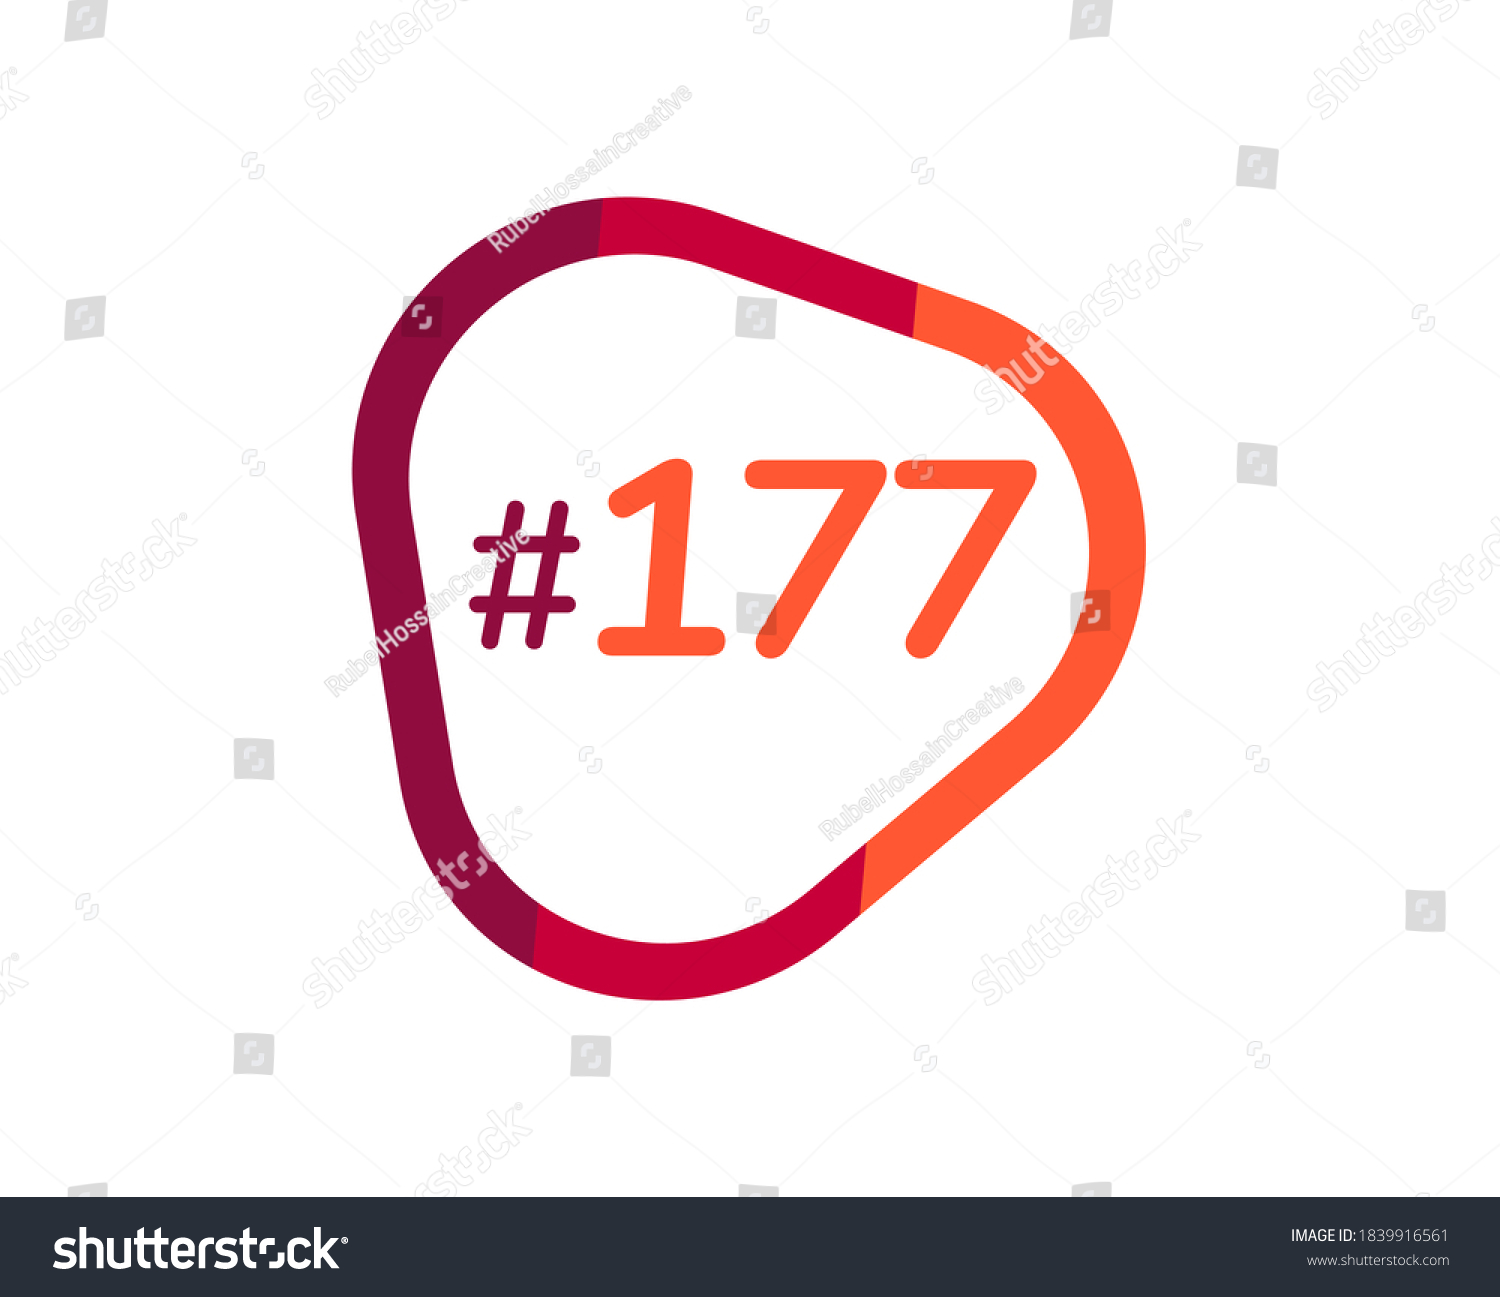 Number 177 Image Design 177 Logos Stock Vector Royalty Free